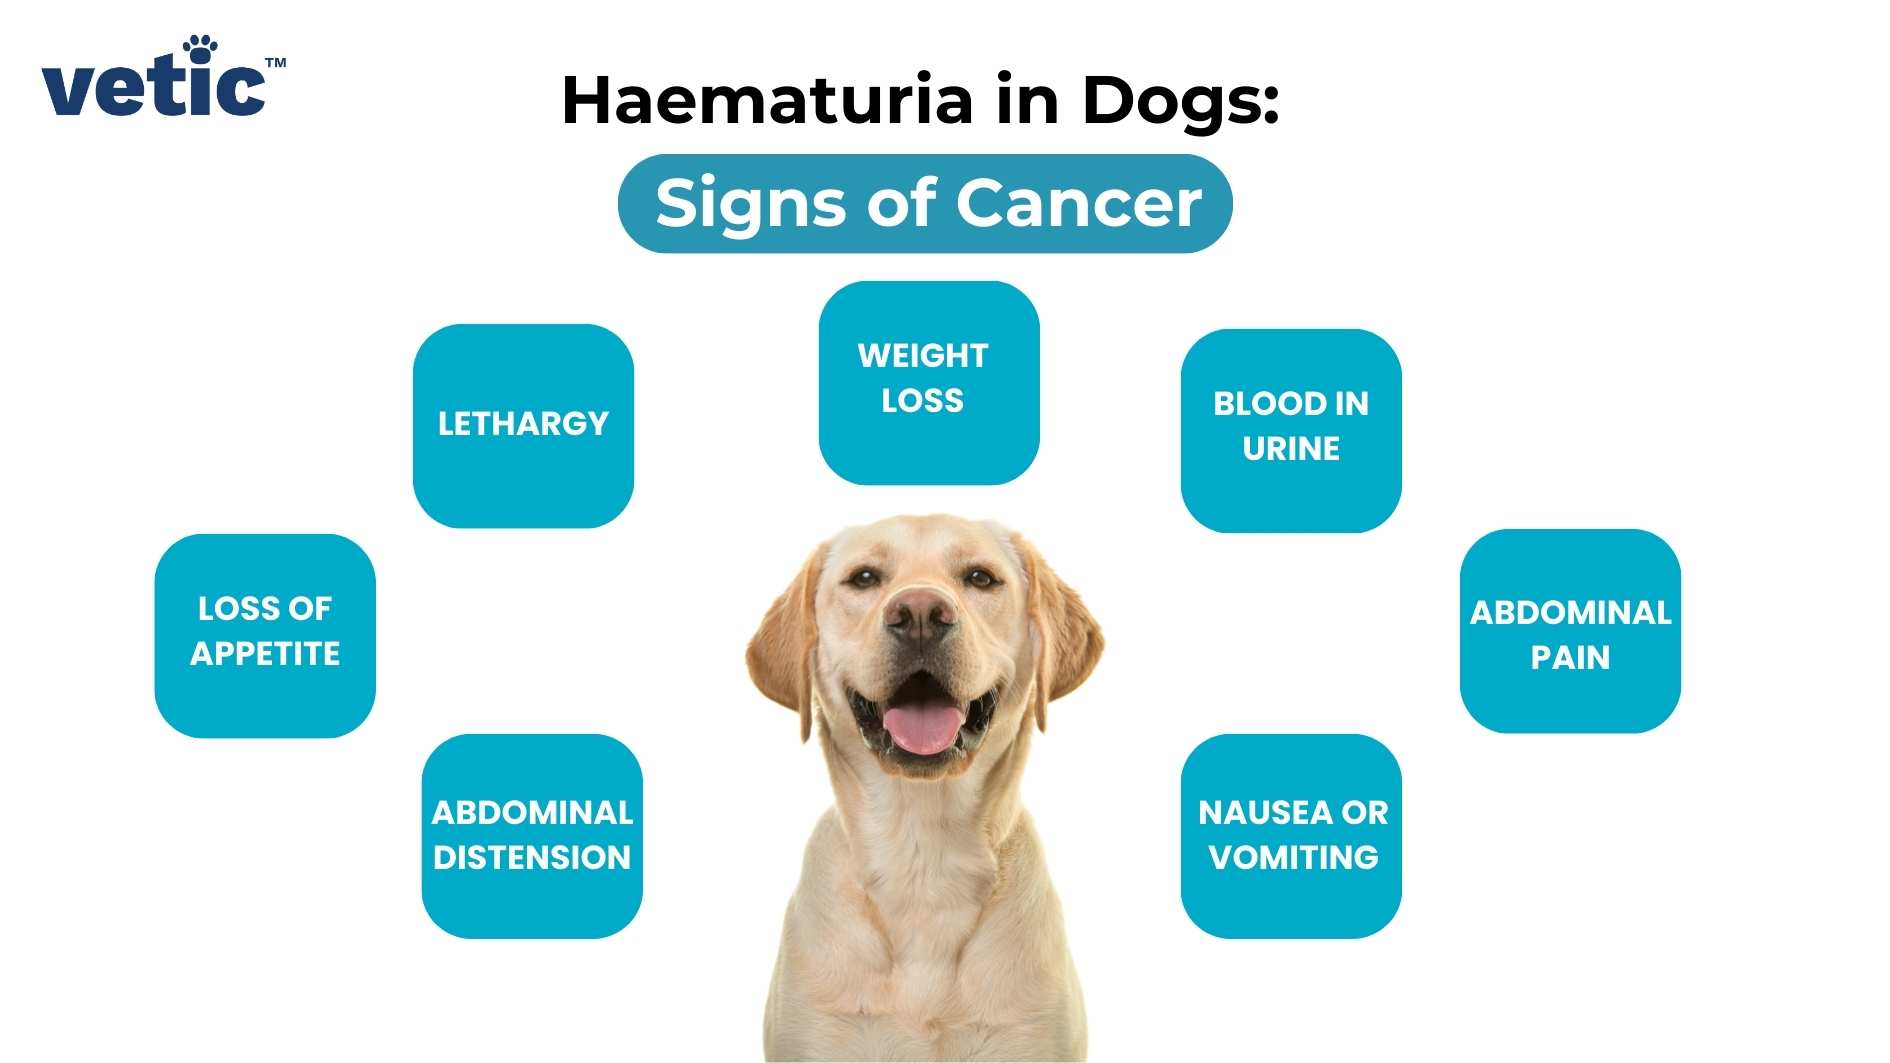 Haematuria in dogs can also be a sign of cancer. If your dog is peeing blood note co-occurring signs such as weight loss, lethargy, appetite loss, abdominal pain and distension, along with vomiting and nausea. These signs can indicate cancer of the excretory organs.